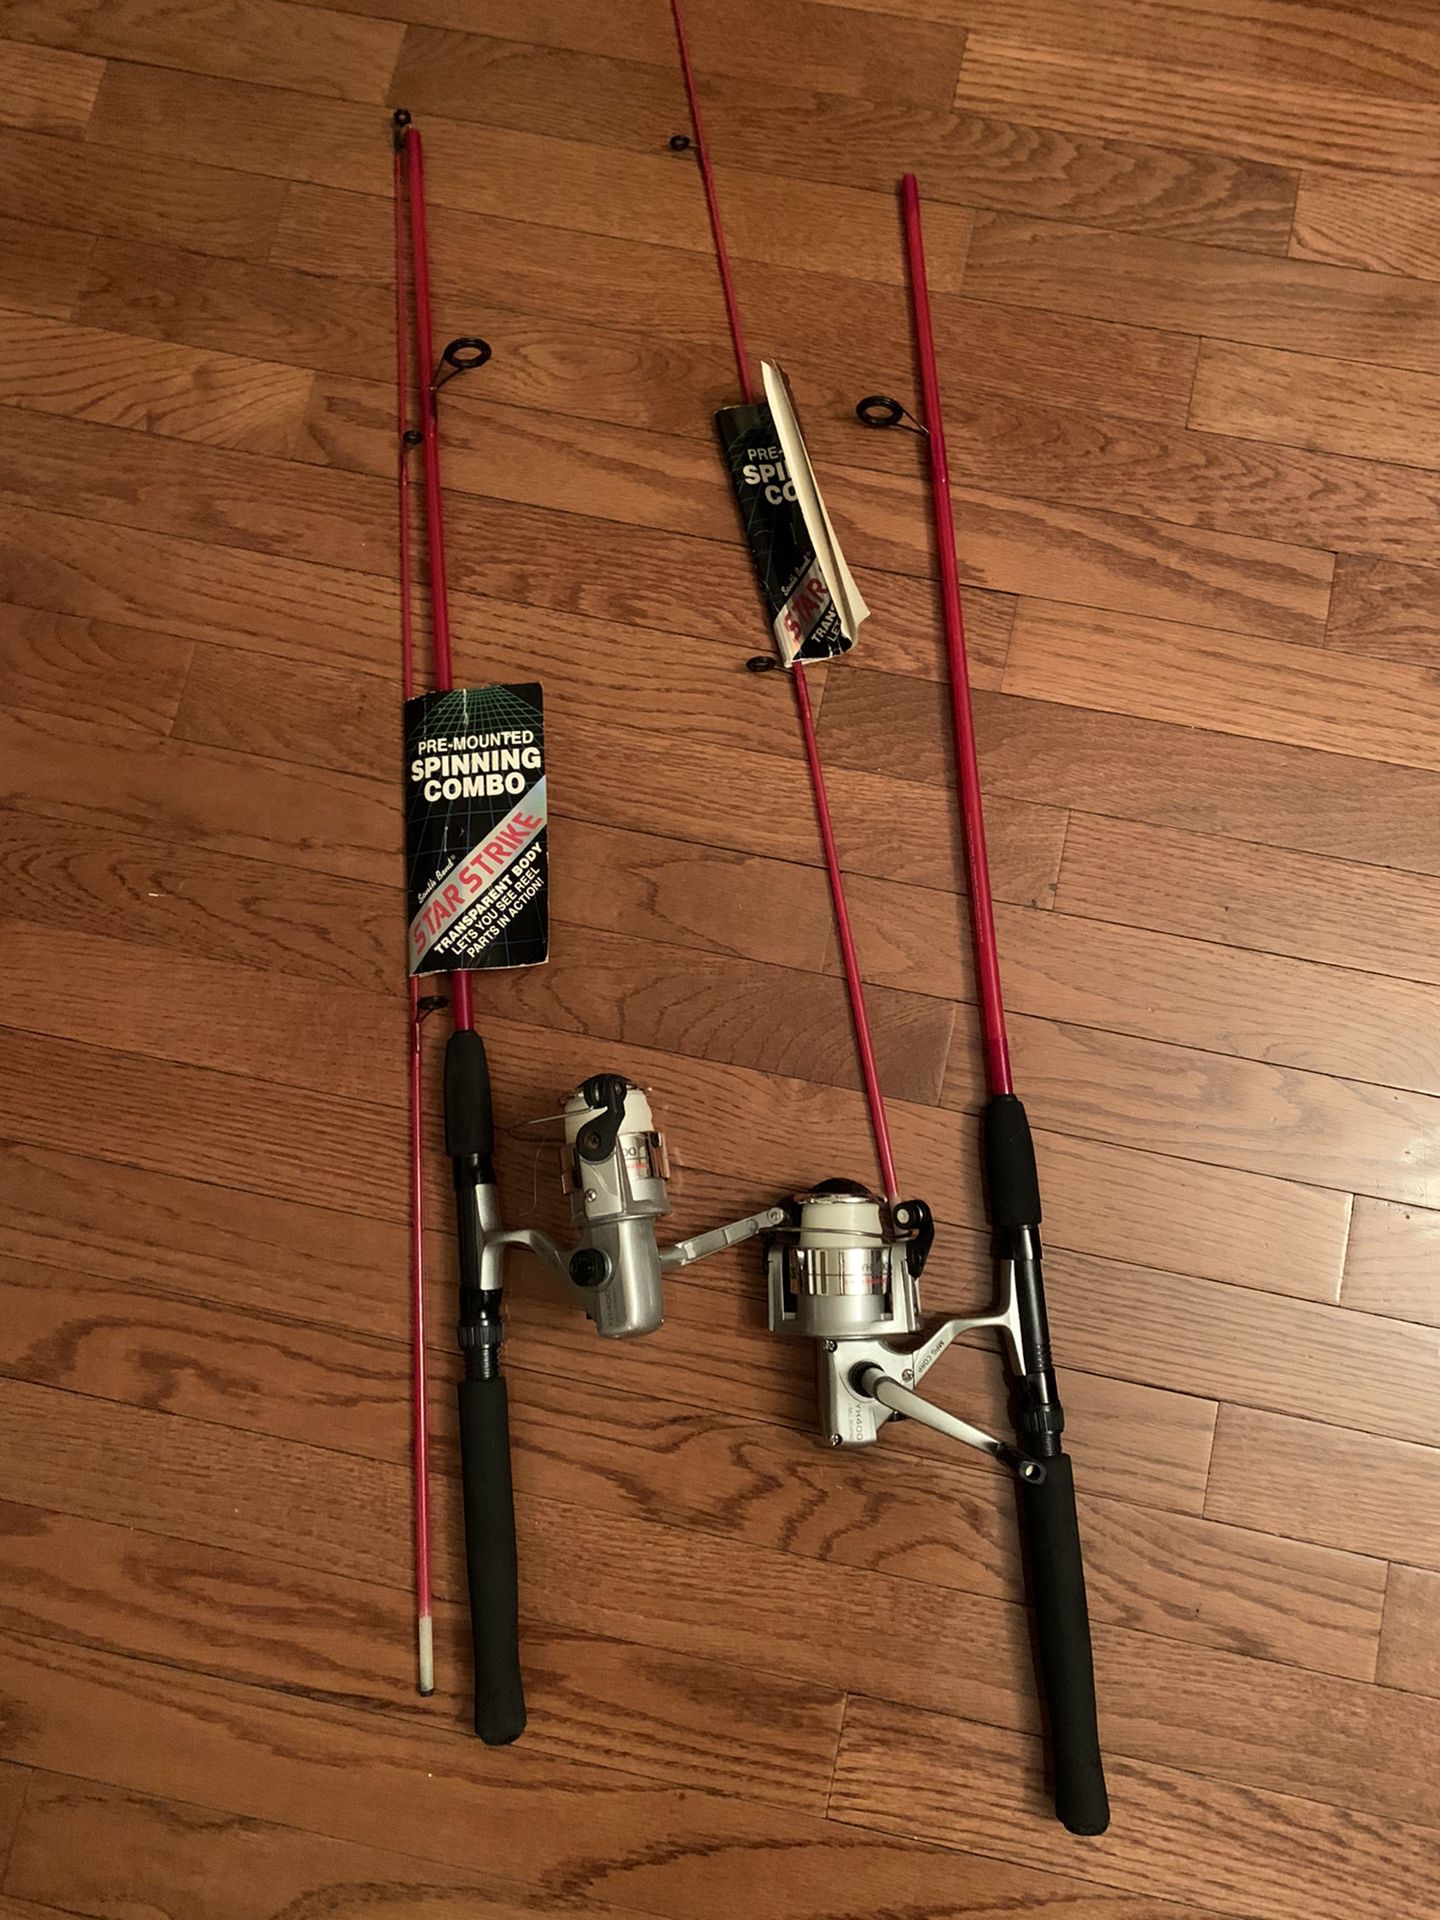 Two Quality Fishing Rods( Pre- Mounted Spinning Combo) NEW! $30 - Buy One Get One Free!